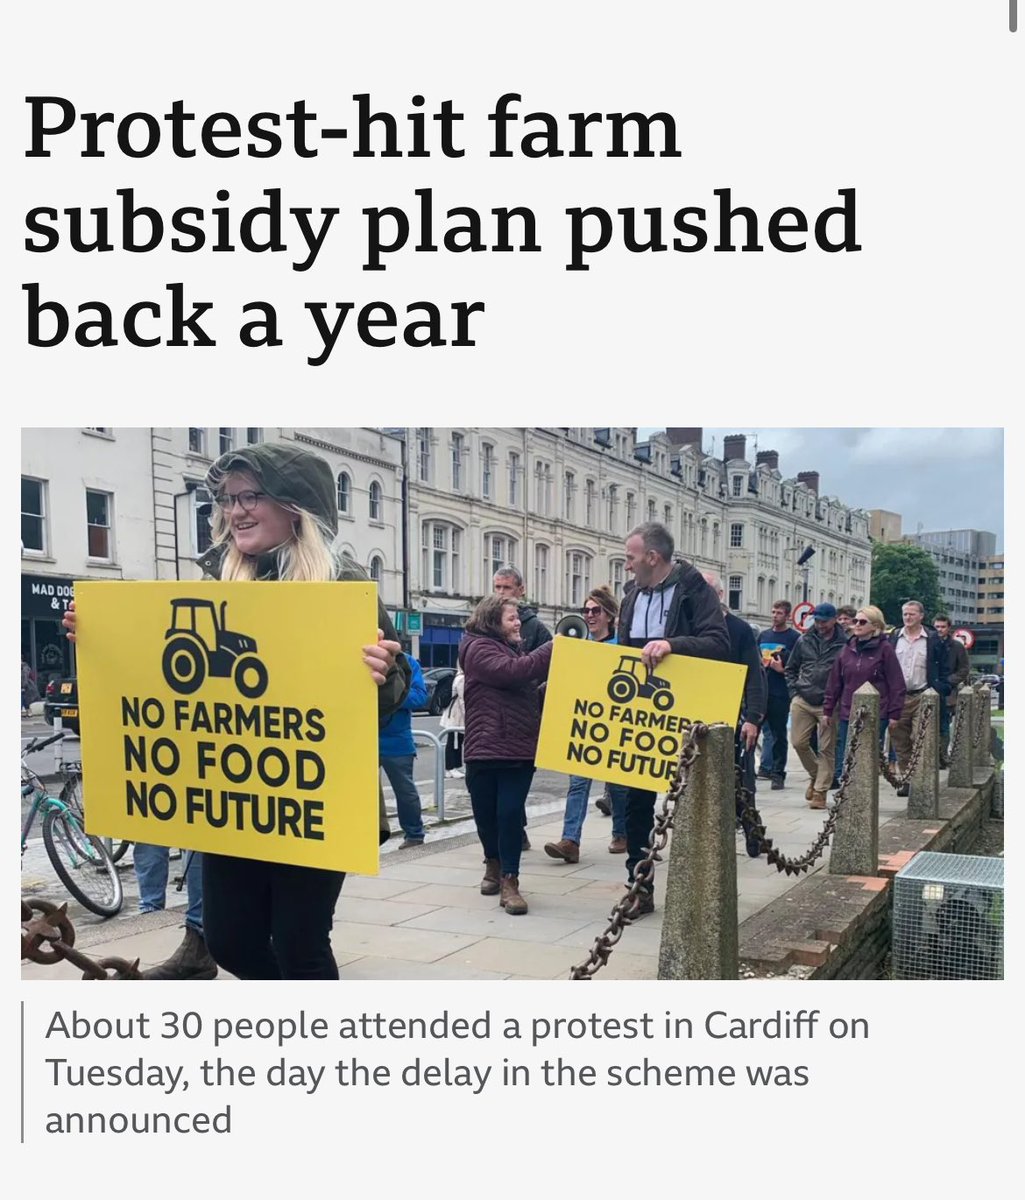 Kicking the can down the road. Labour and Plaid’s so called “Sustainable Farming Scheme” will decimate Welsh agriculture. A “pause” isn’t enough. It must be scrapped.